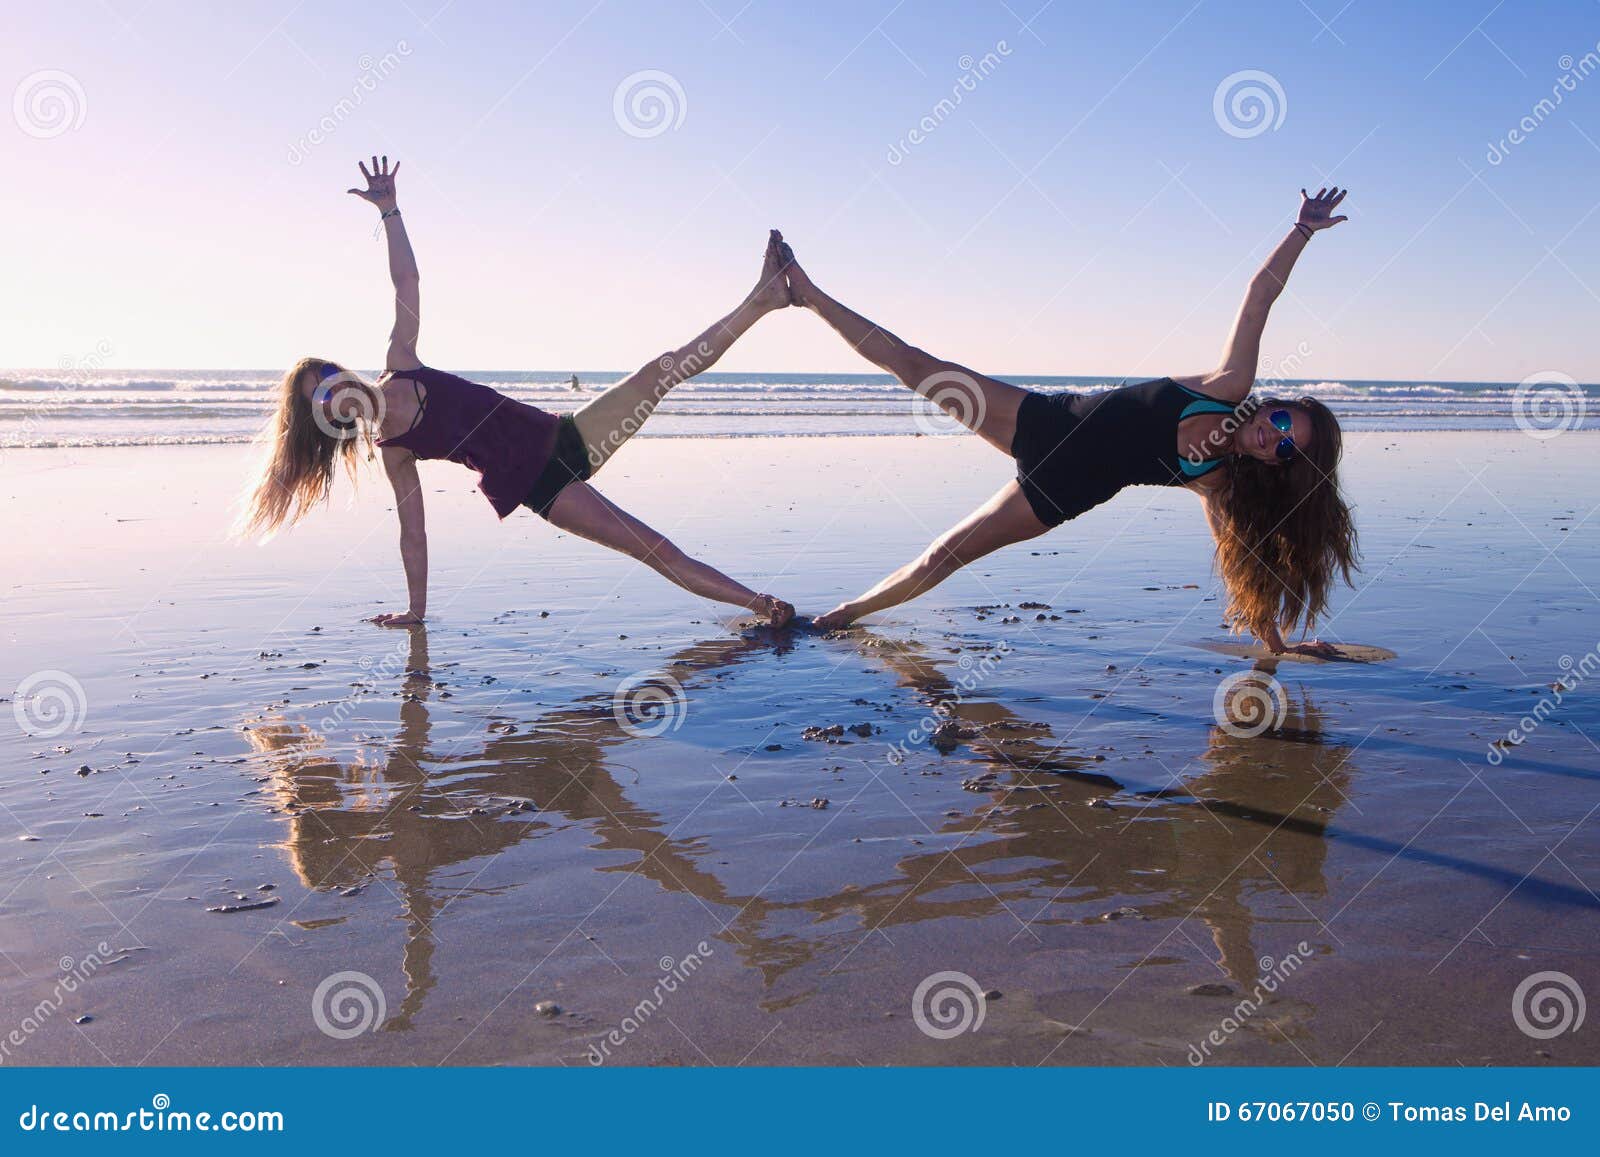 Two women doing yoga on beach in … – License image – 71183451 ❘ lookphotos